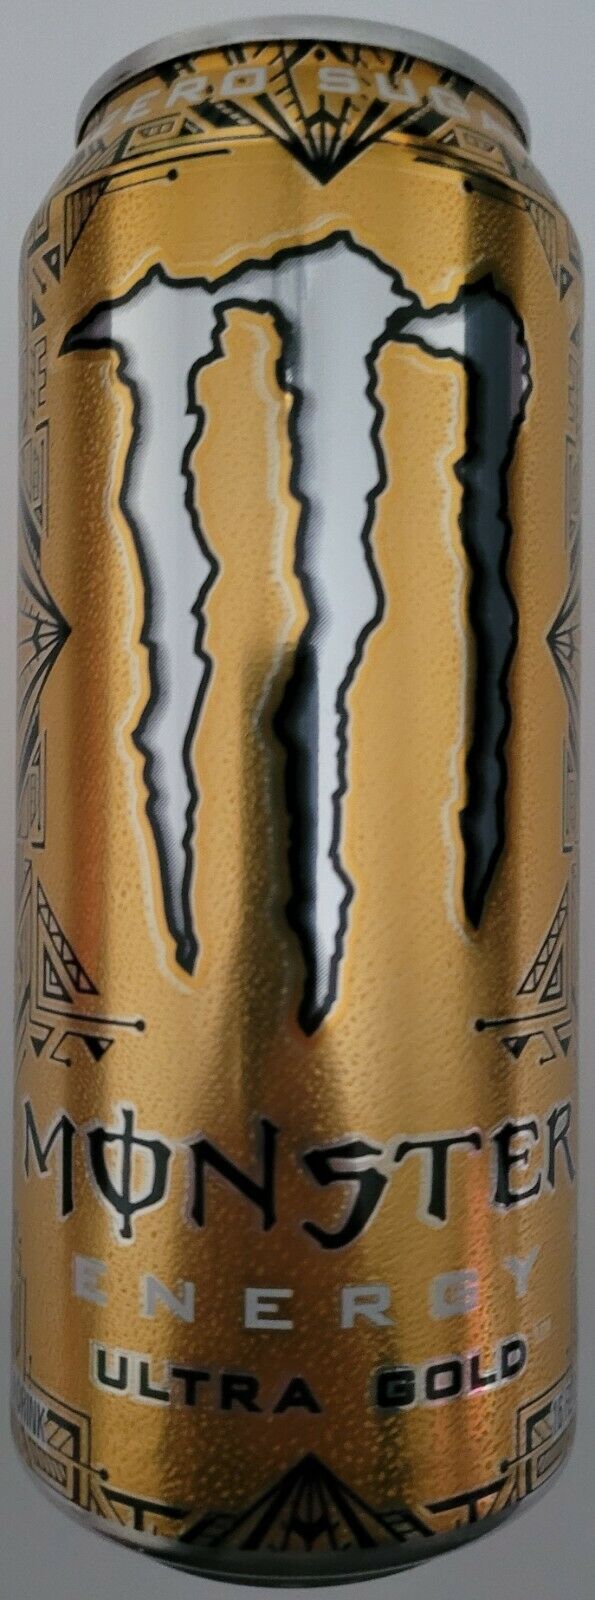 New Monster Energy Ultra Gold + Energy Drink 16 Fl Oz Full Can Free Shipping